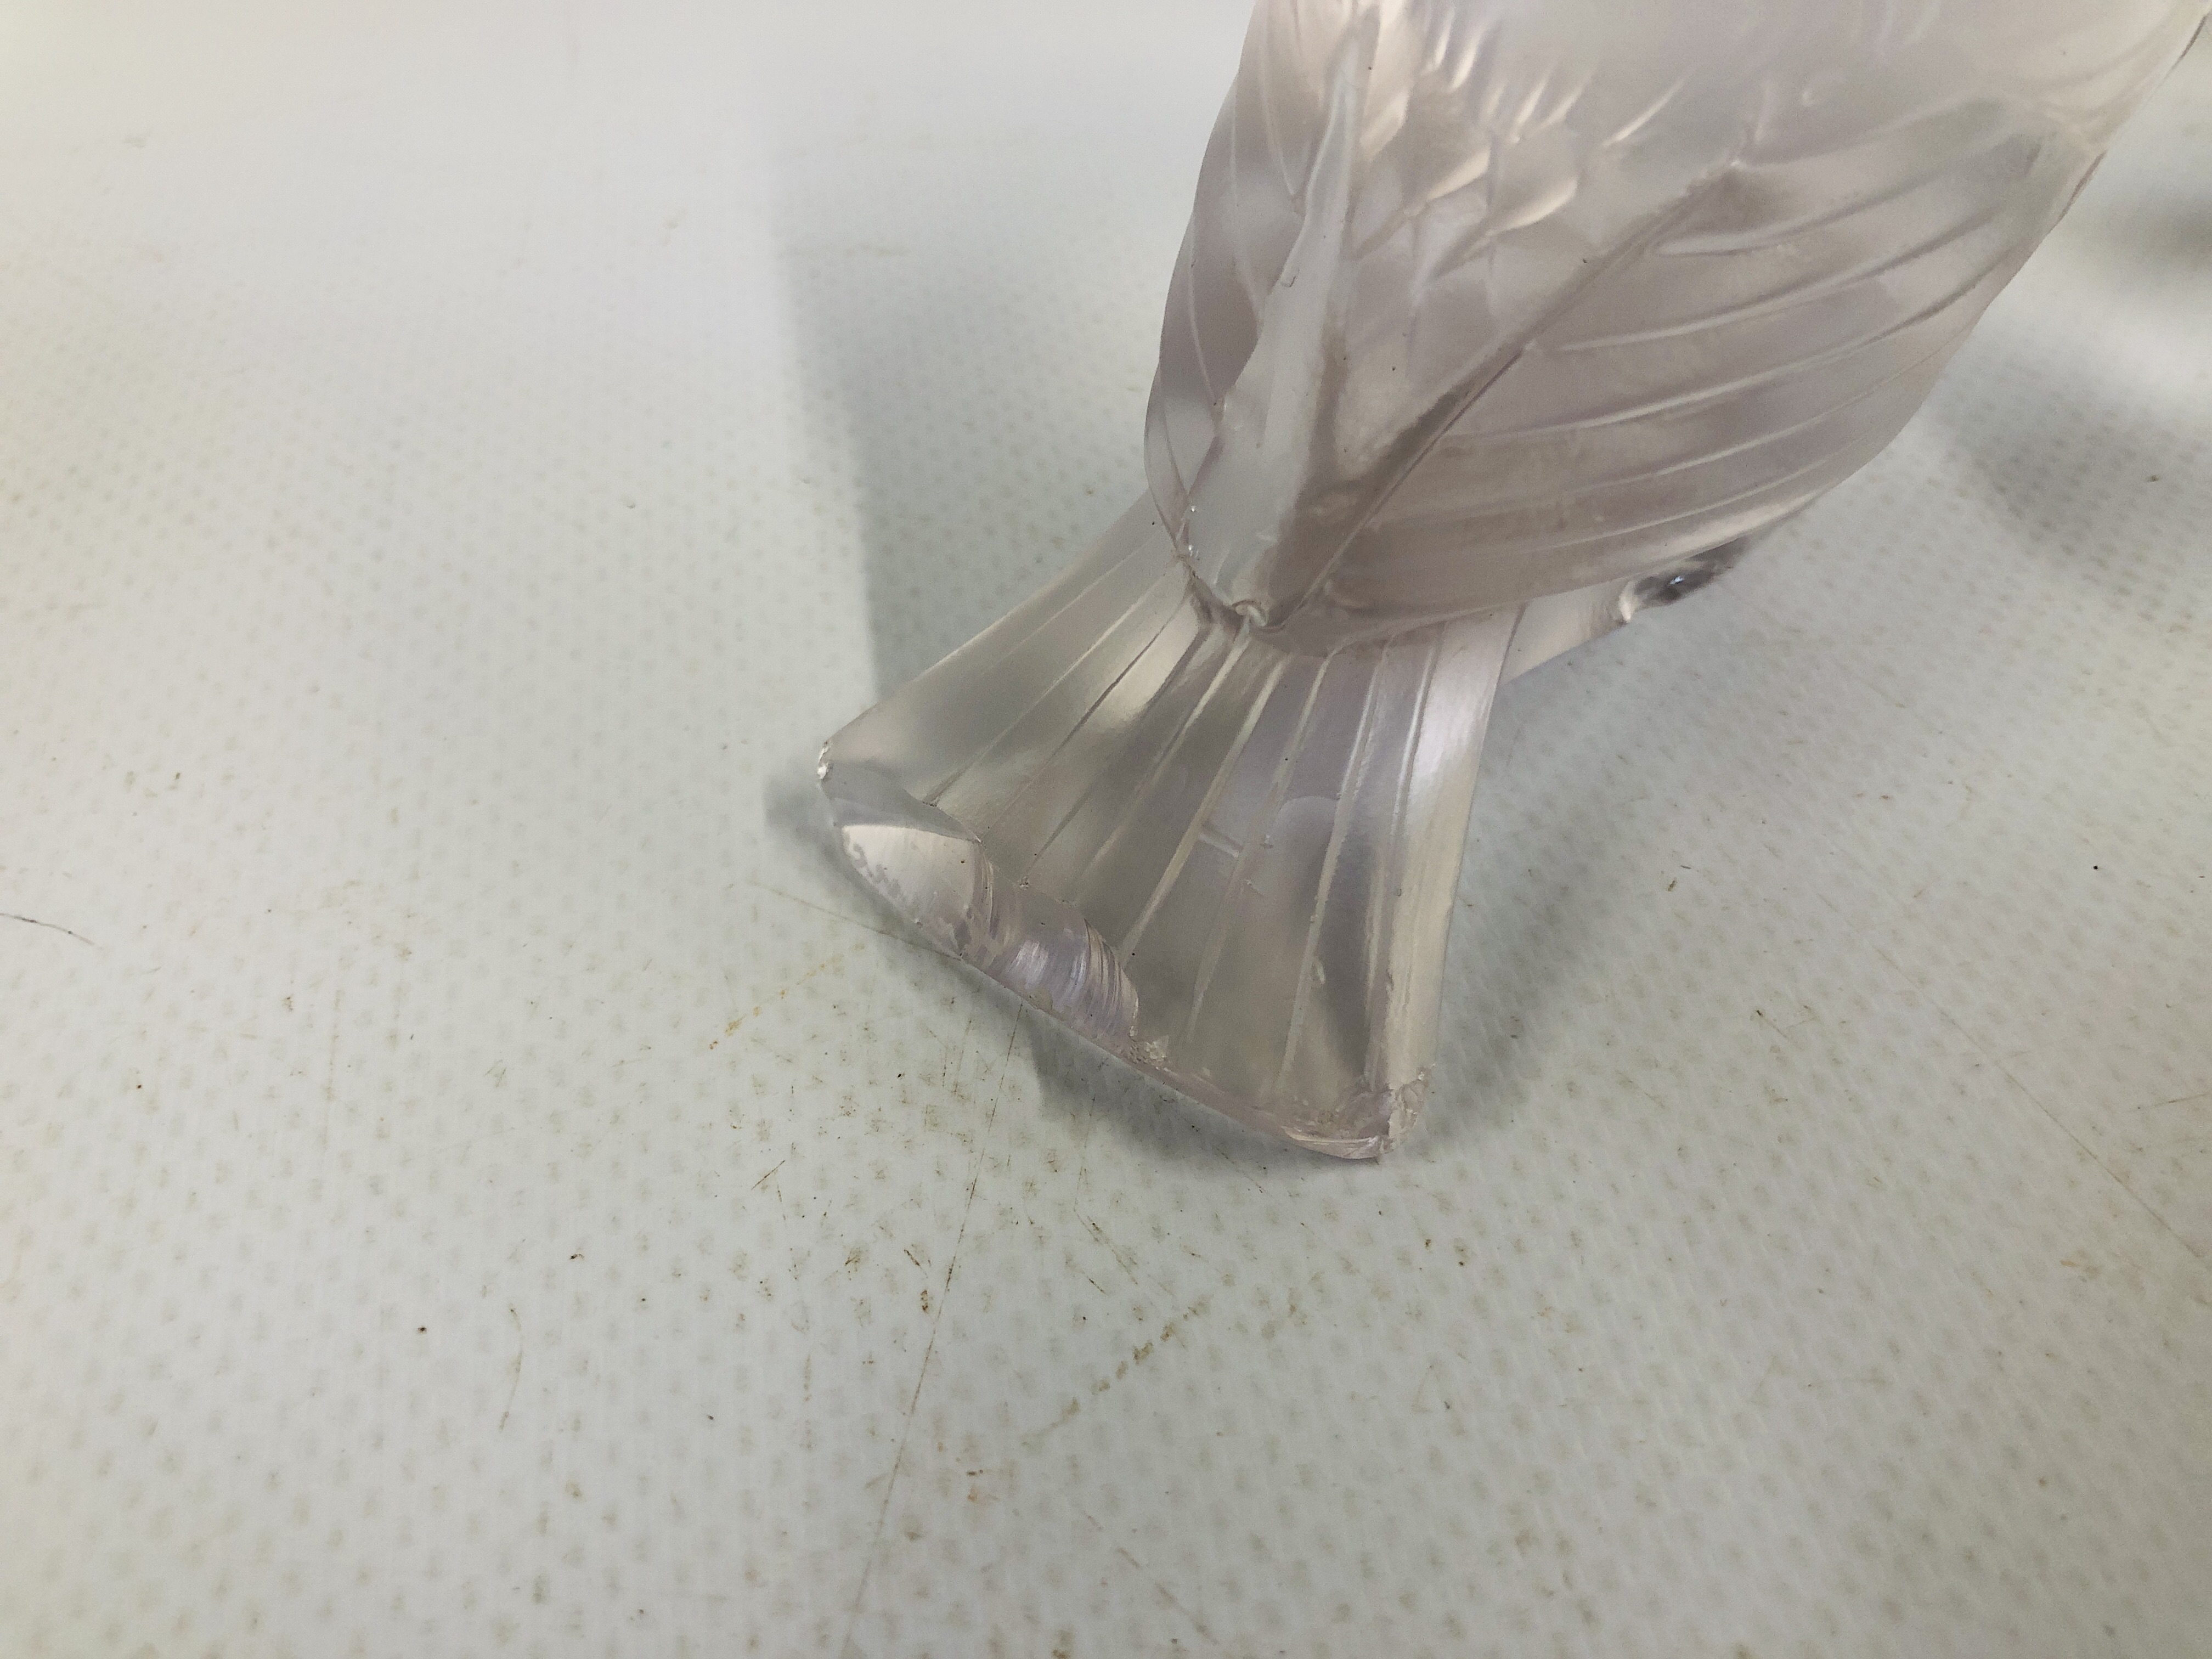 A COLLECTION OF 4 LALIQUE BIRDS A/F ALONG WITH 1 FURTHER FRENCH GLASS BIRD A/F. - Image 7 of 20